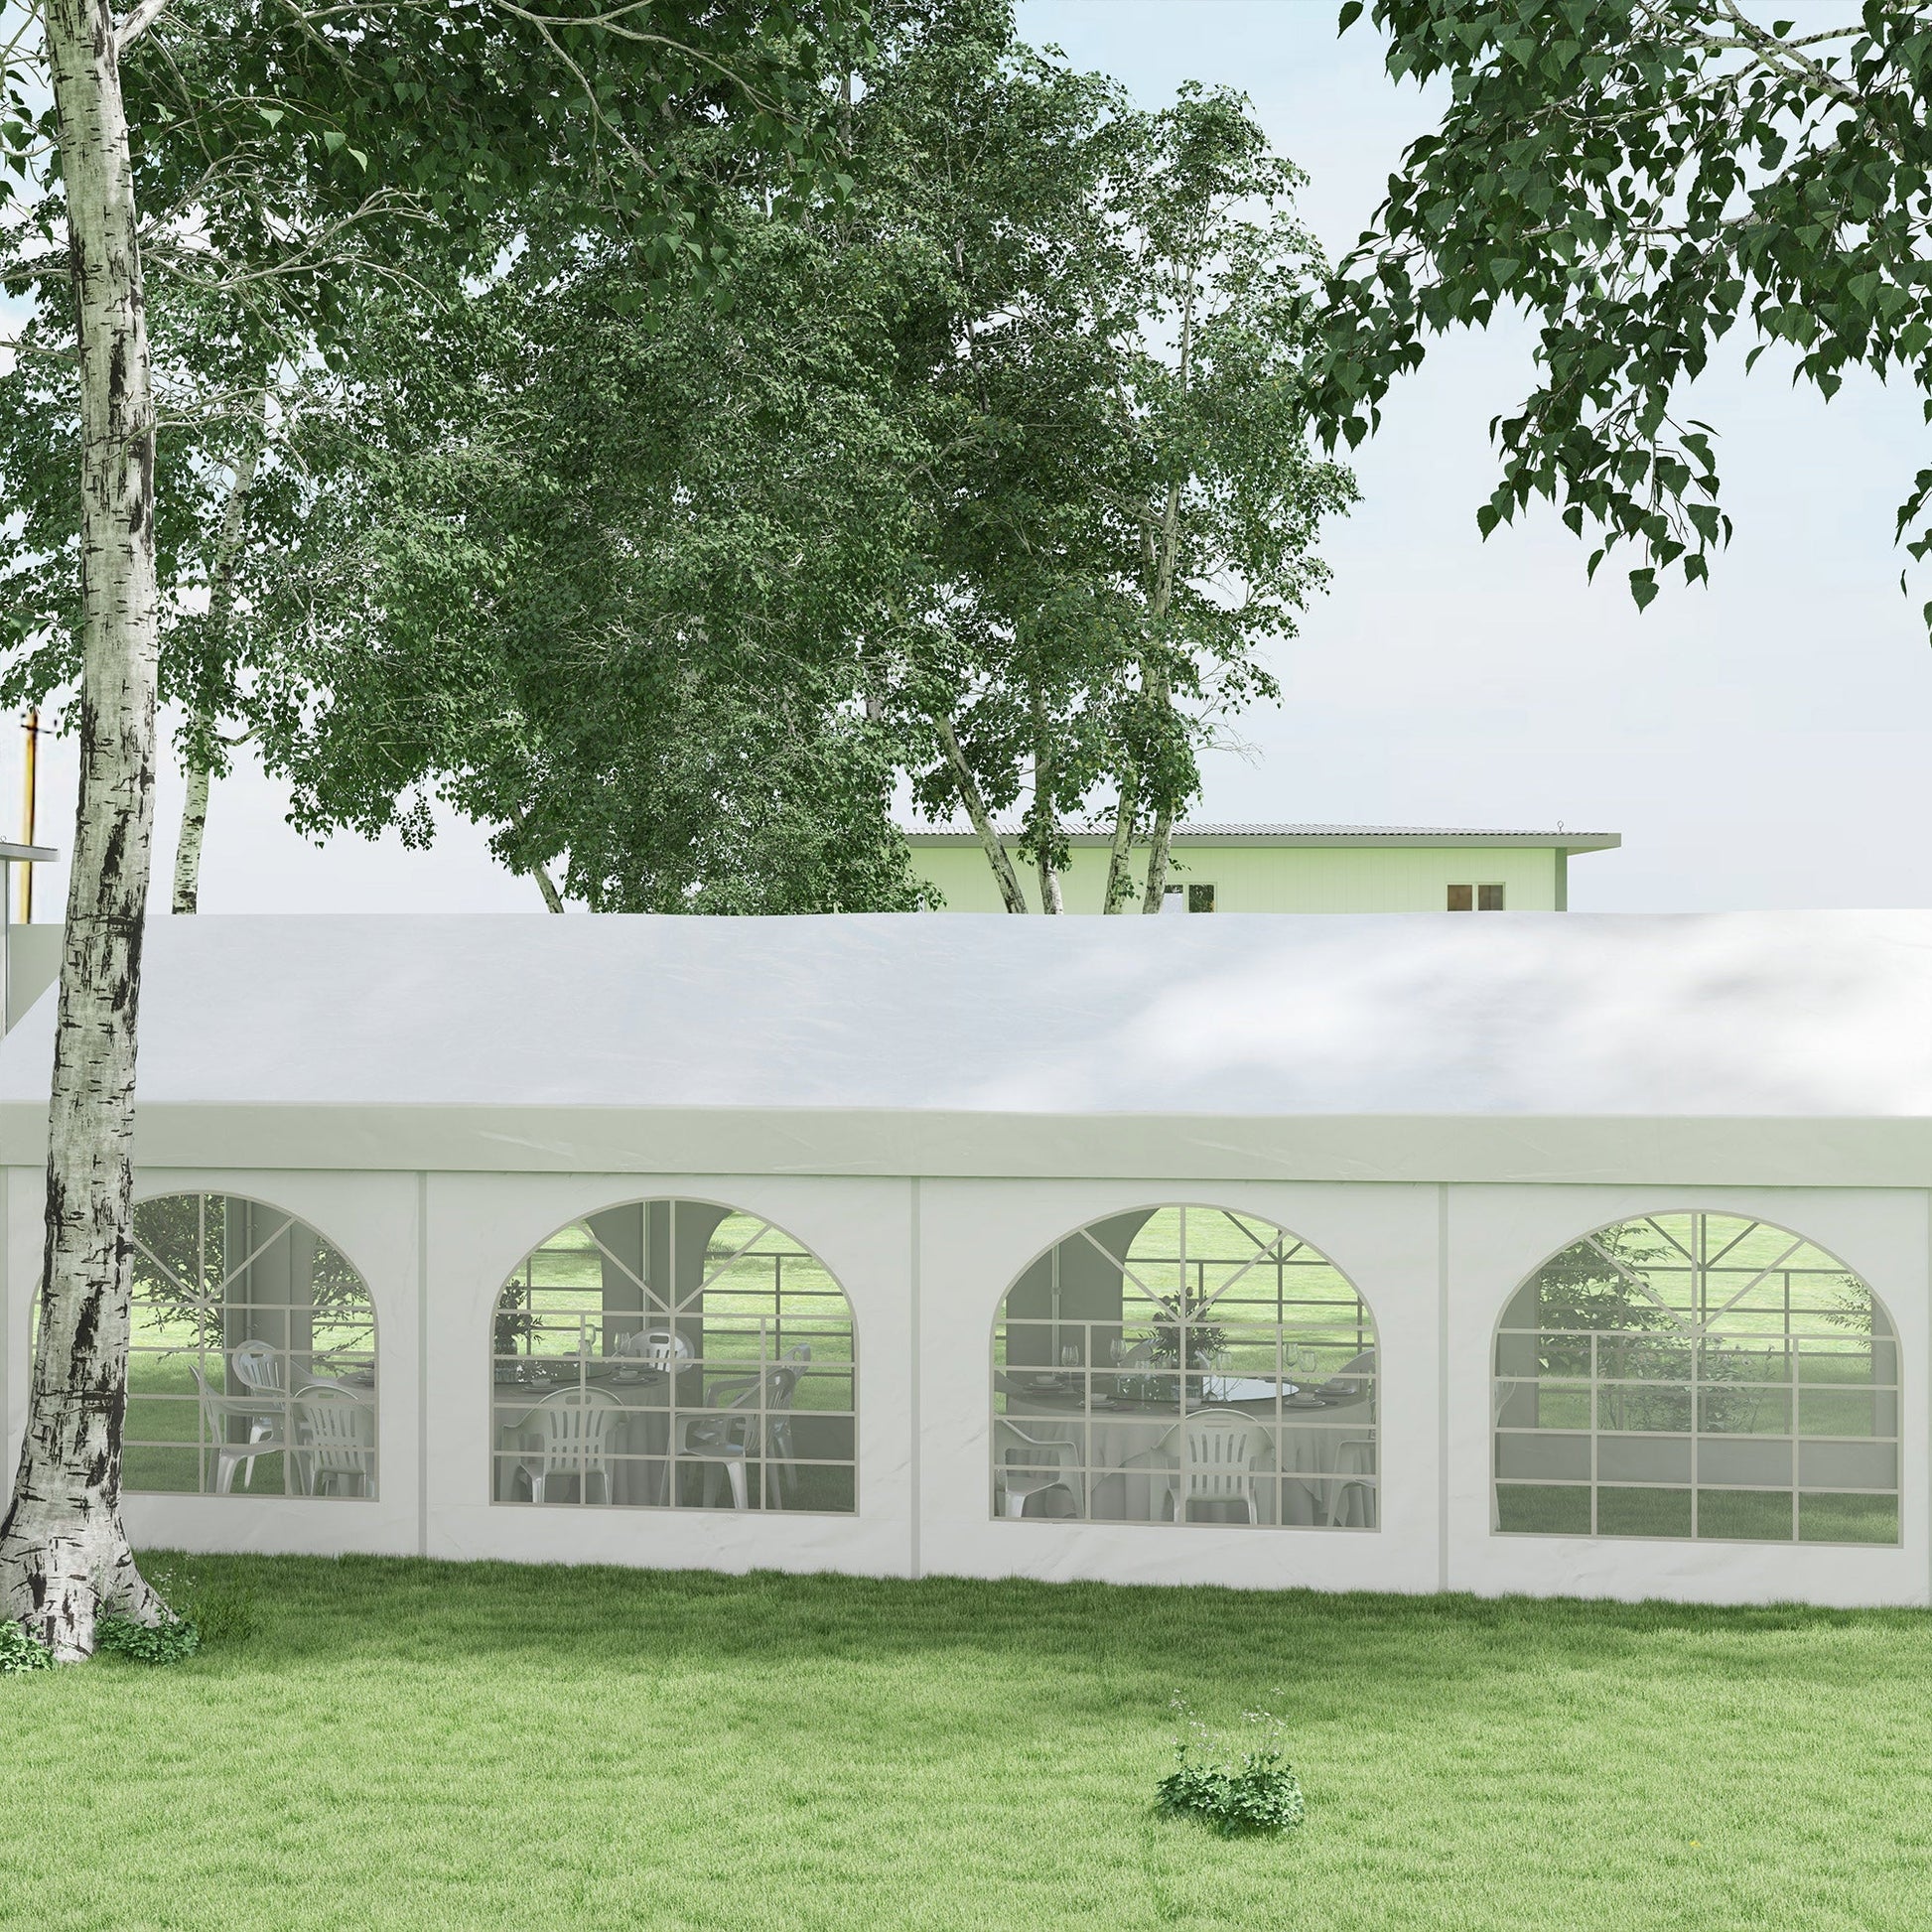 10' x 26' Party Tent Canopy Shelter, Portable Garage Carport with Removable Sidewalls, 2 Doors and Windows at Gallery Canada